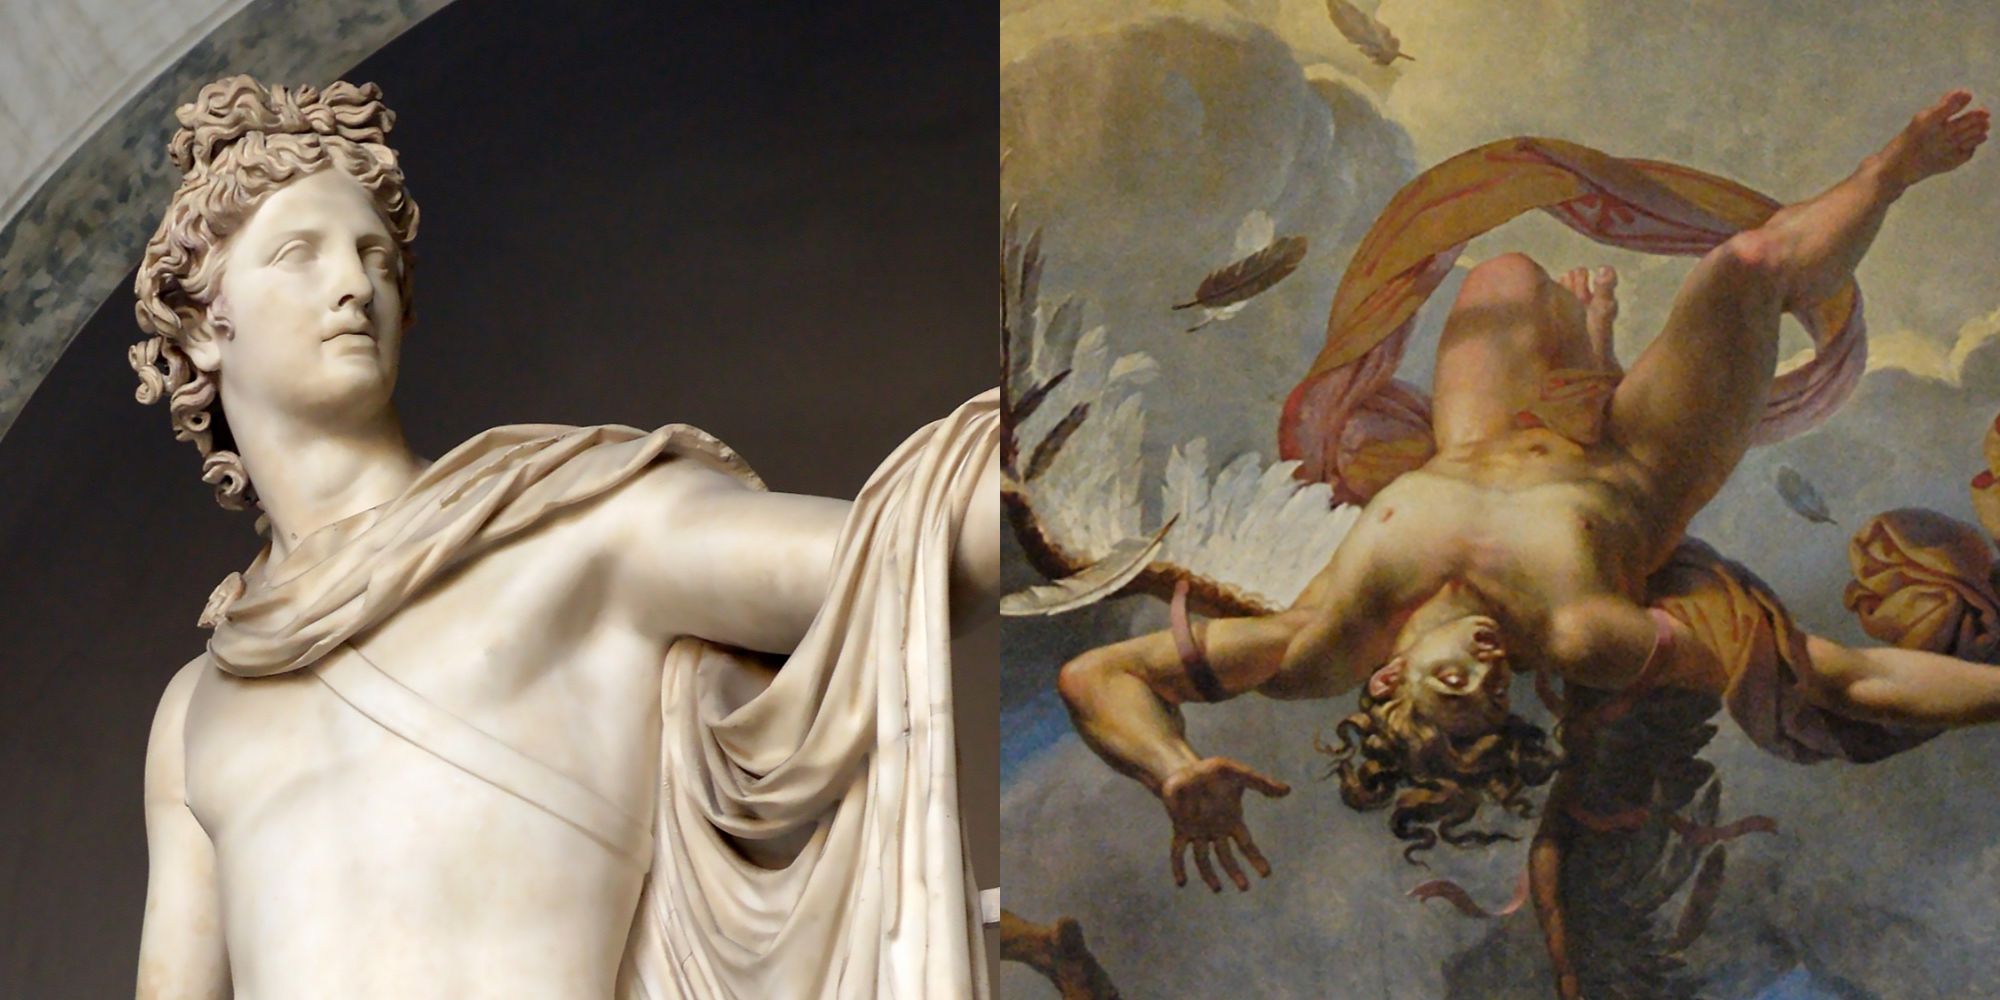 Split image: A sculpture of the Greek god Apollo, a painting of Icarus flying too close to the sun